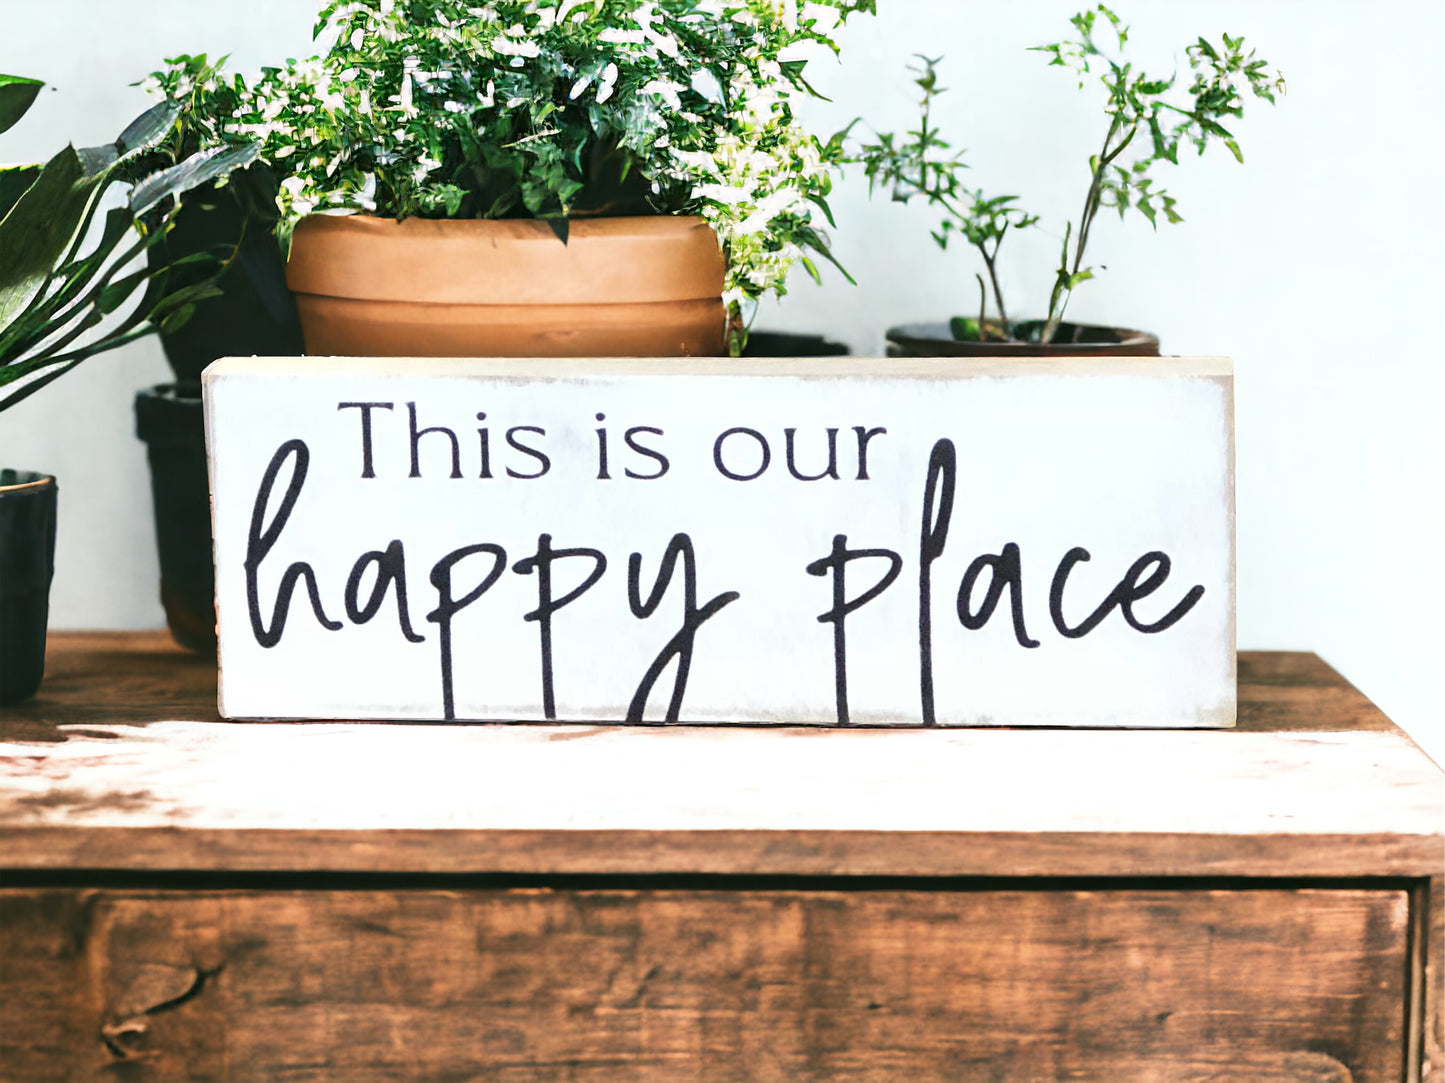 "Happy place" wood sign